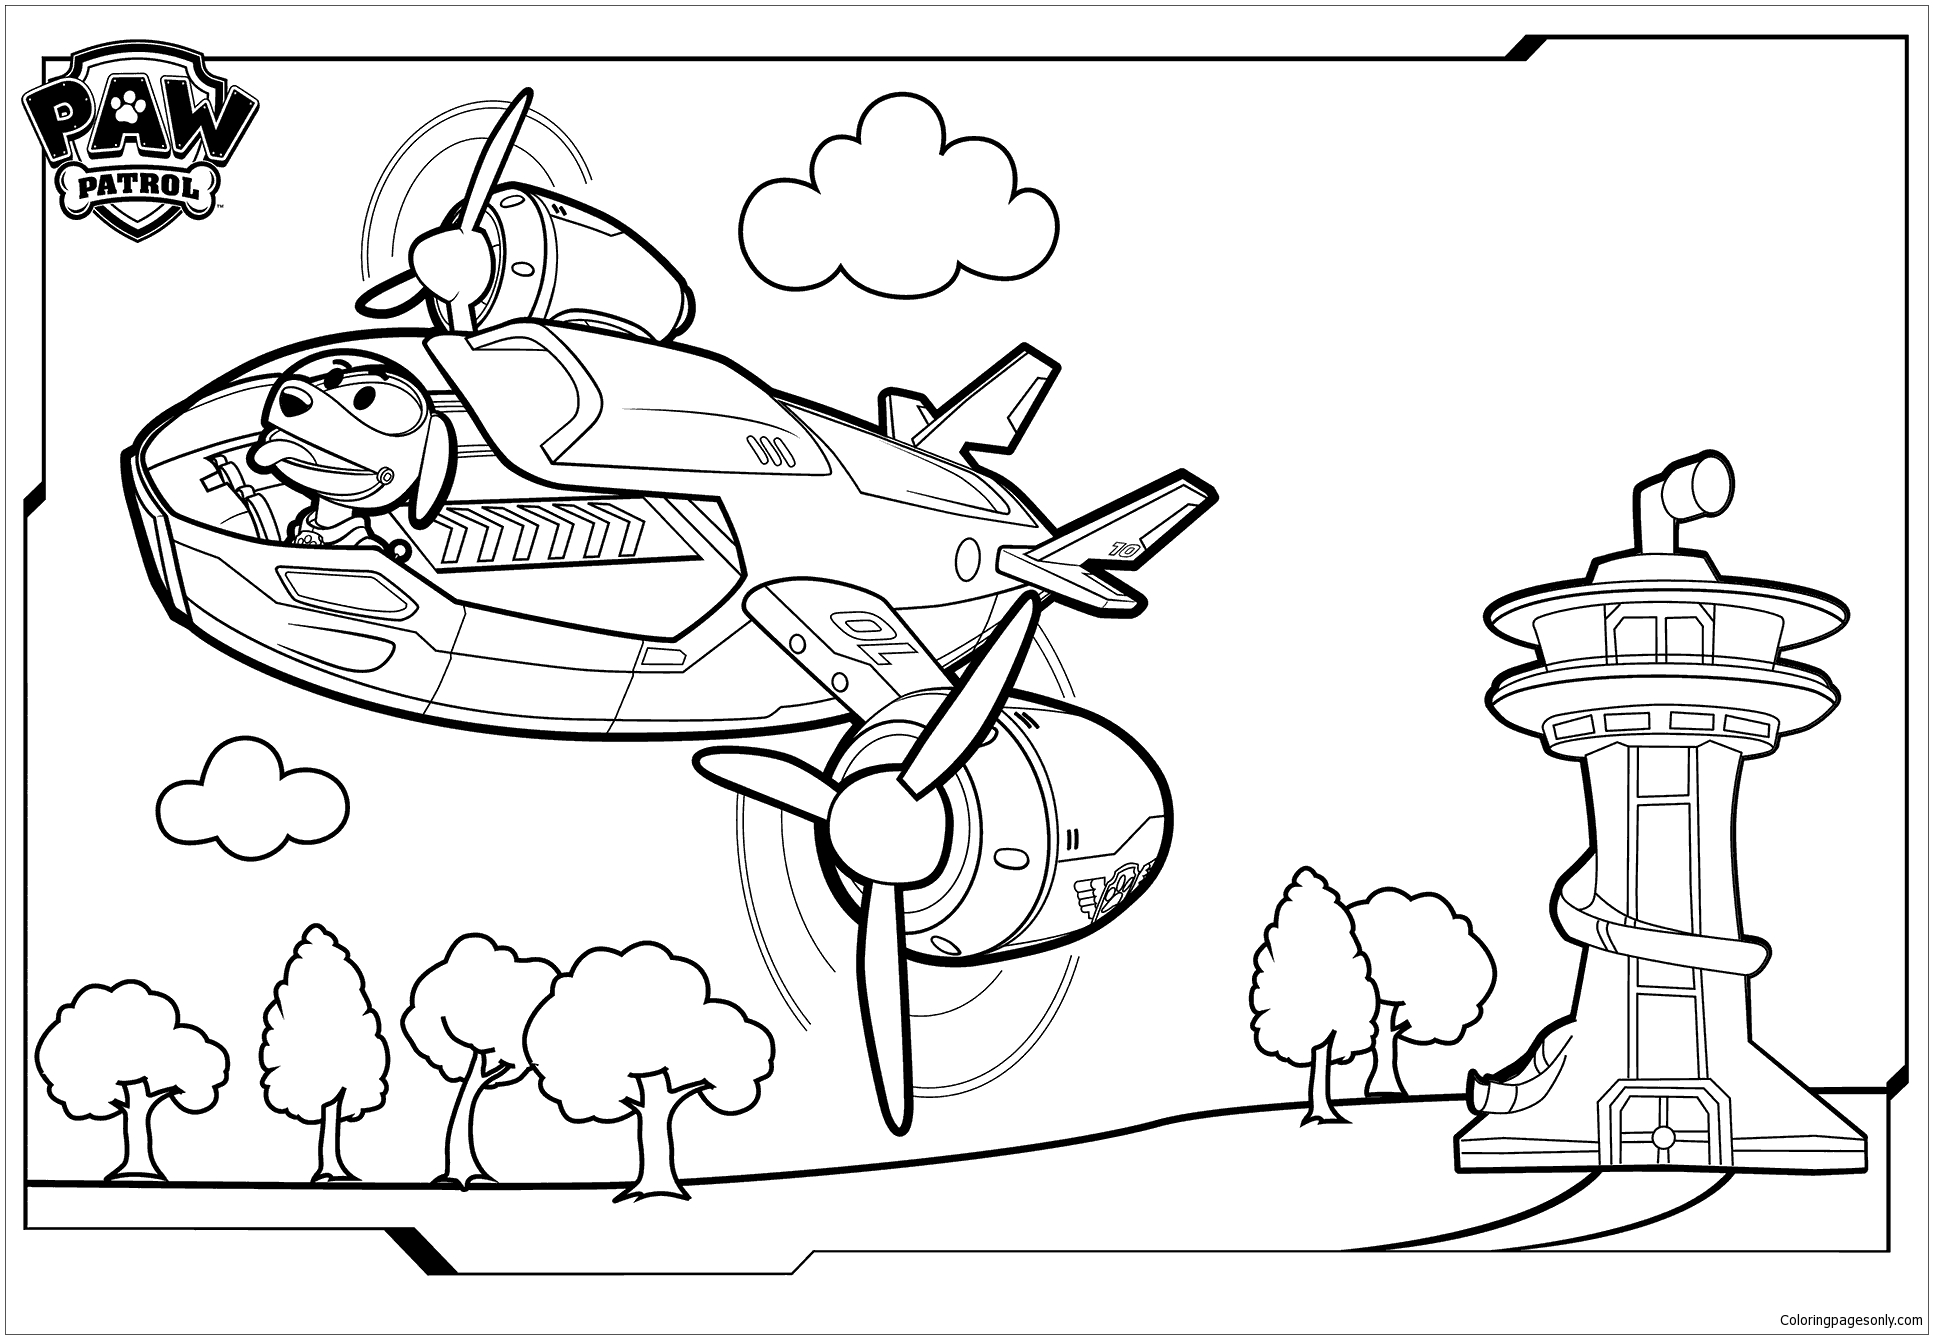 Robo Dog in Air Coloring Page